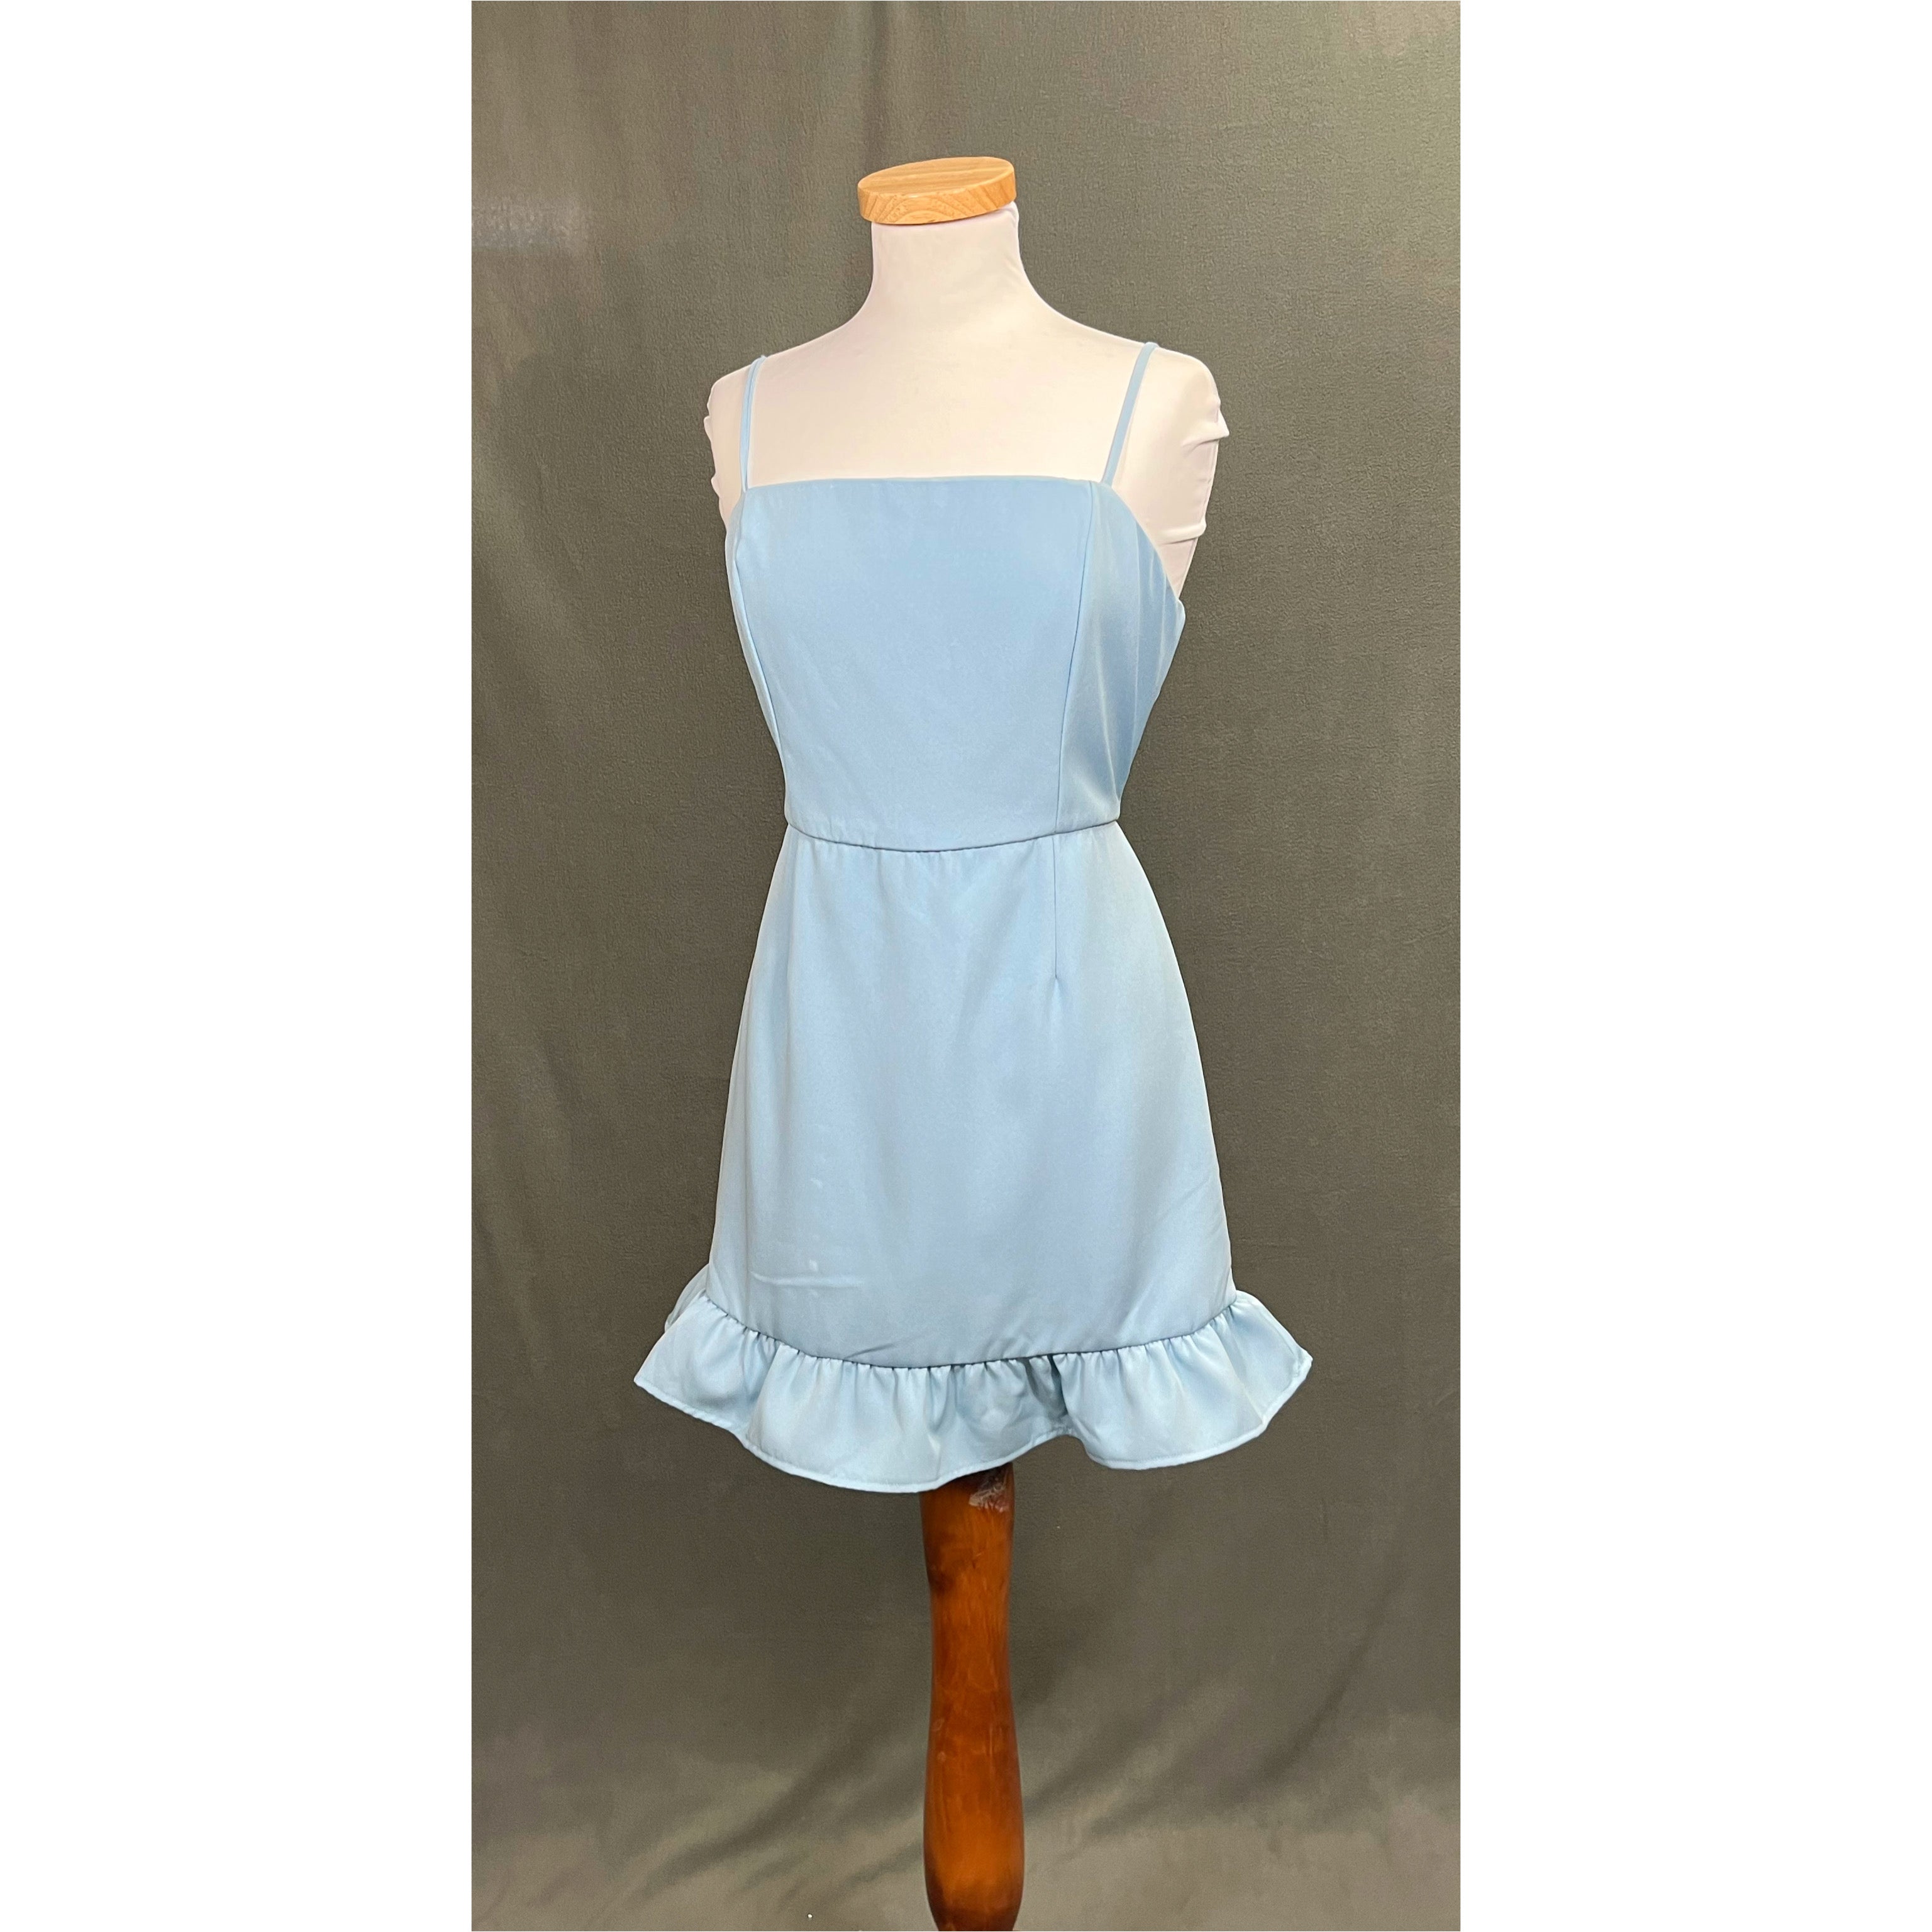 TCEC light blue dress, sizes M & L, NEW WITH TAGS!